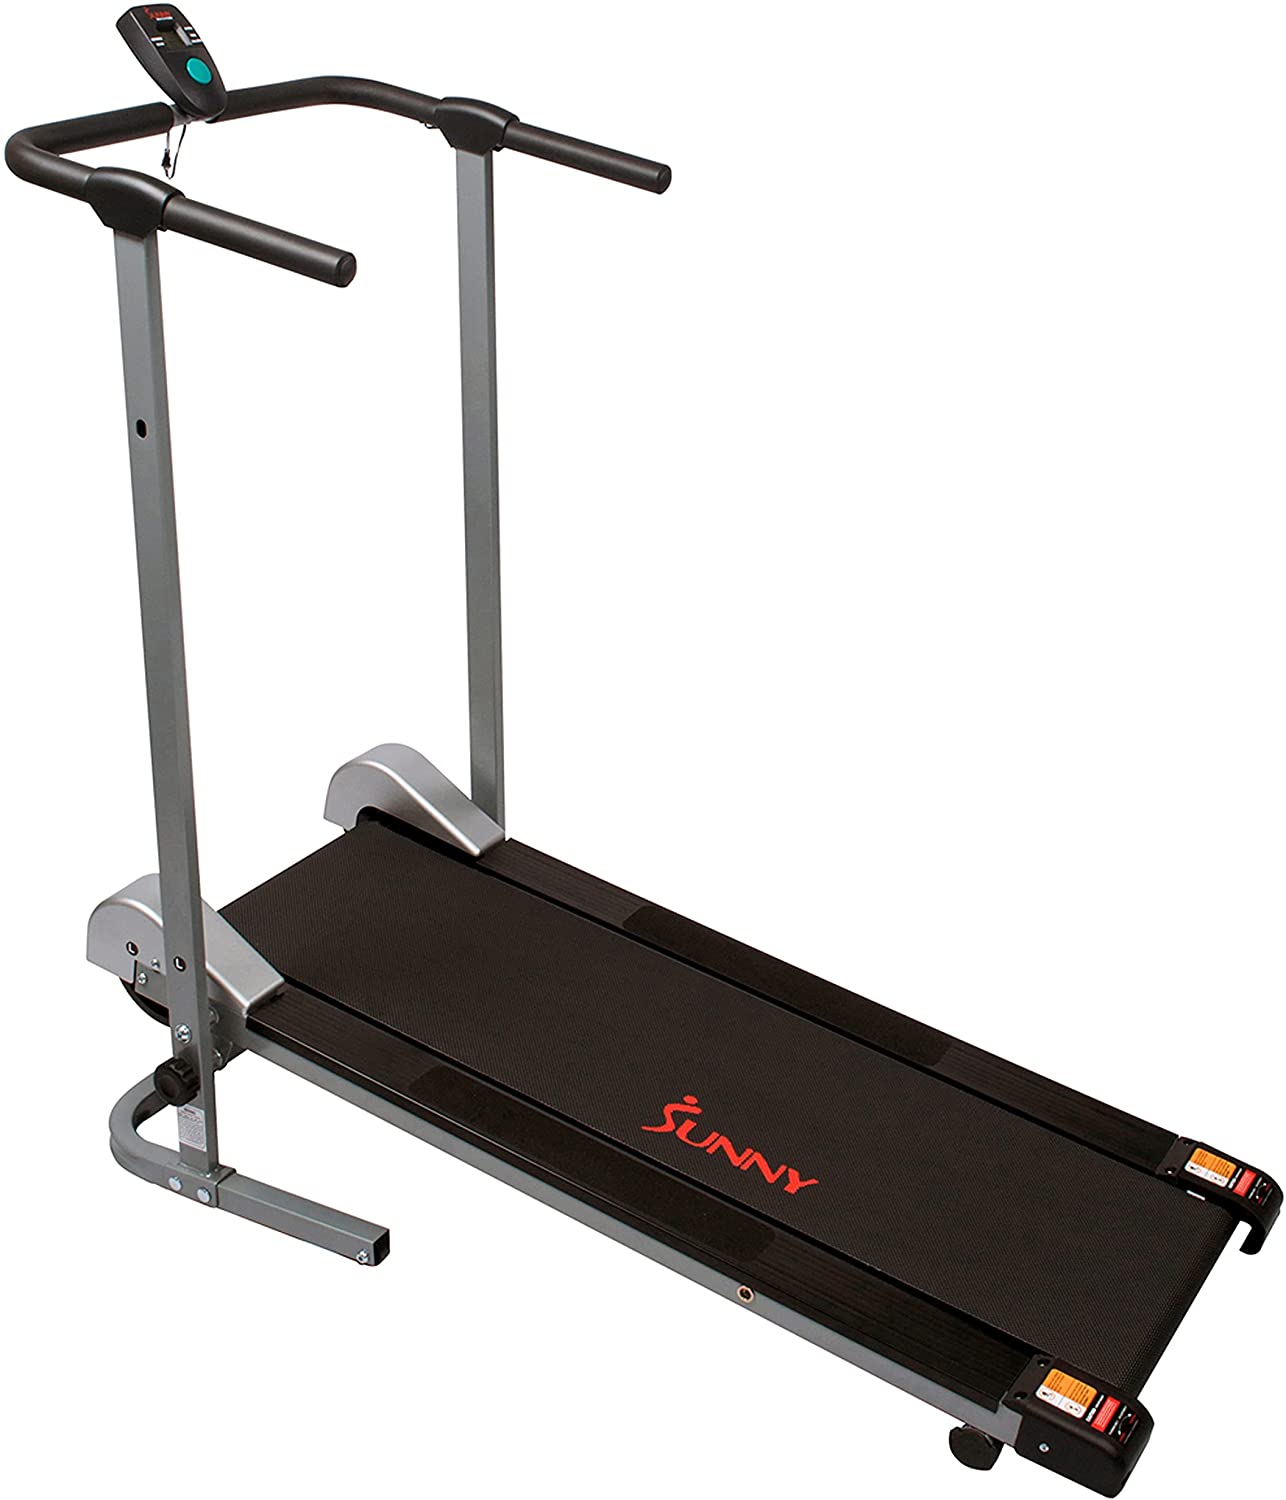 Sunny manual treadmill is a great option for the best home gym equipment for seniors